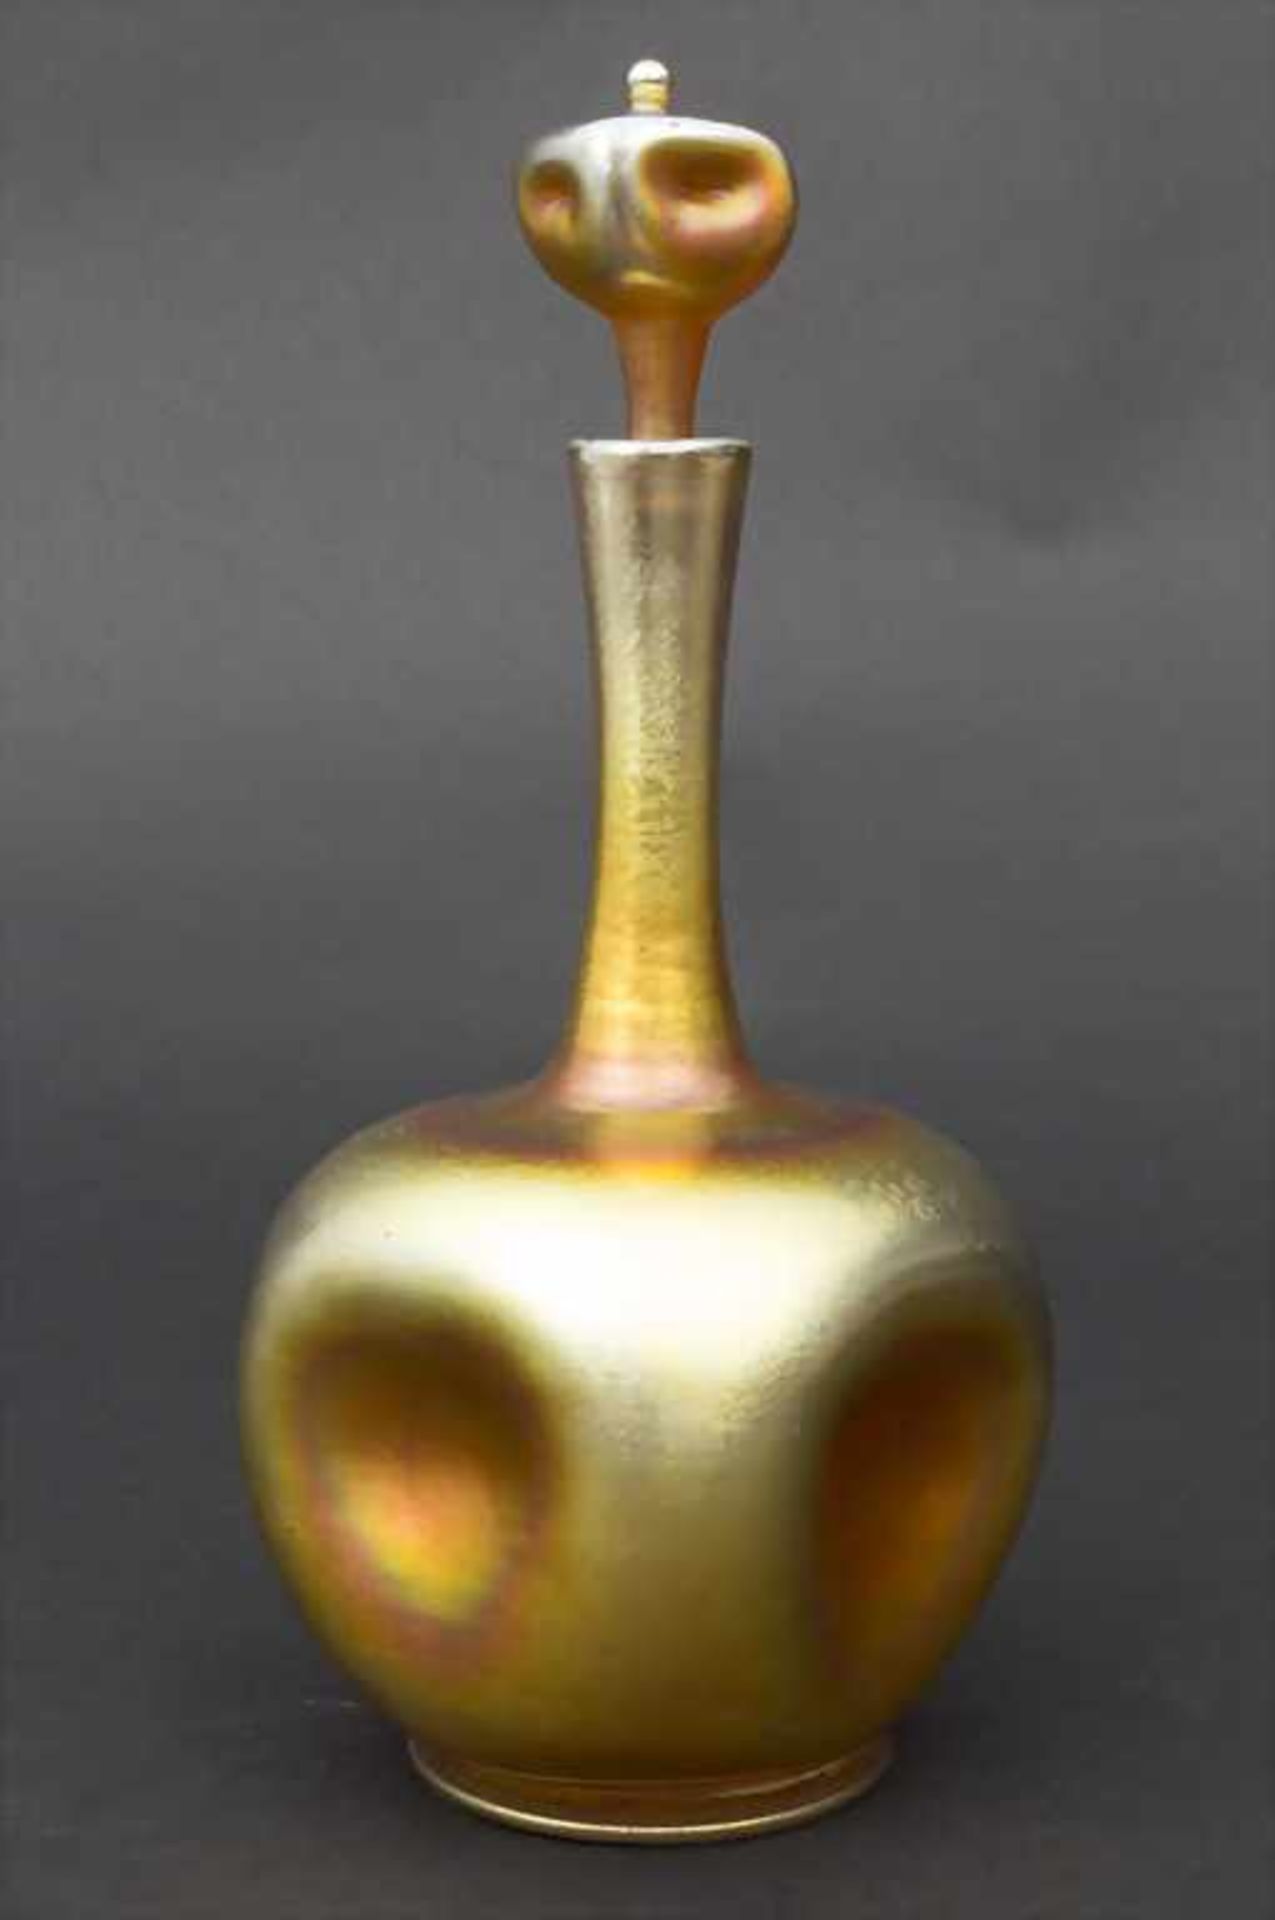 Karaffe mit 5 Bechern / A carafe with 5 beakers, LOUIS COMFORT TIFFANY (1848-1933) - Image 2 of 8